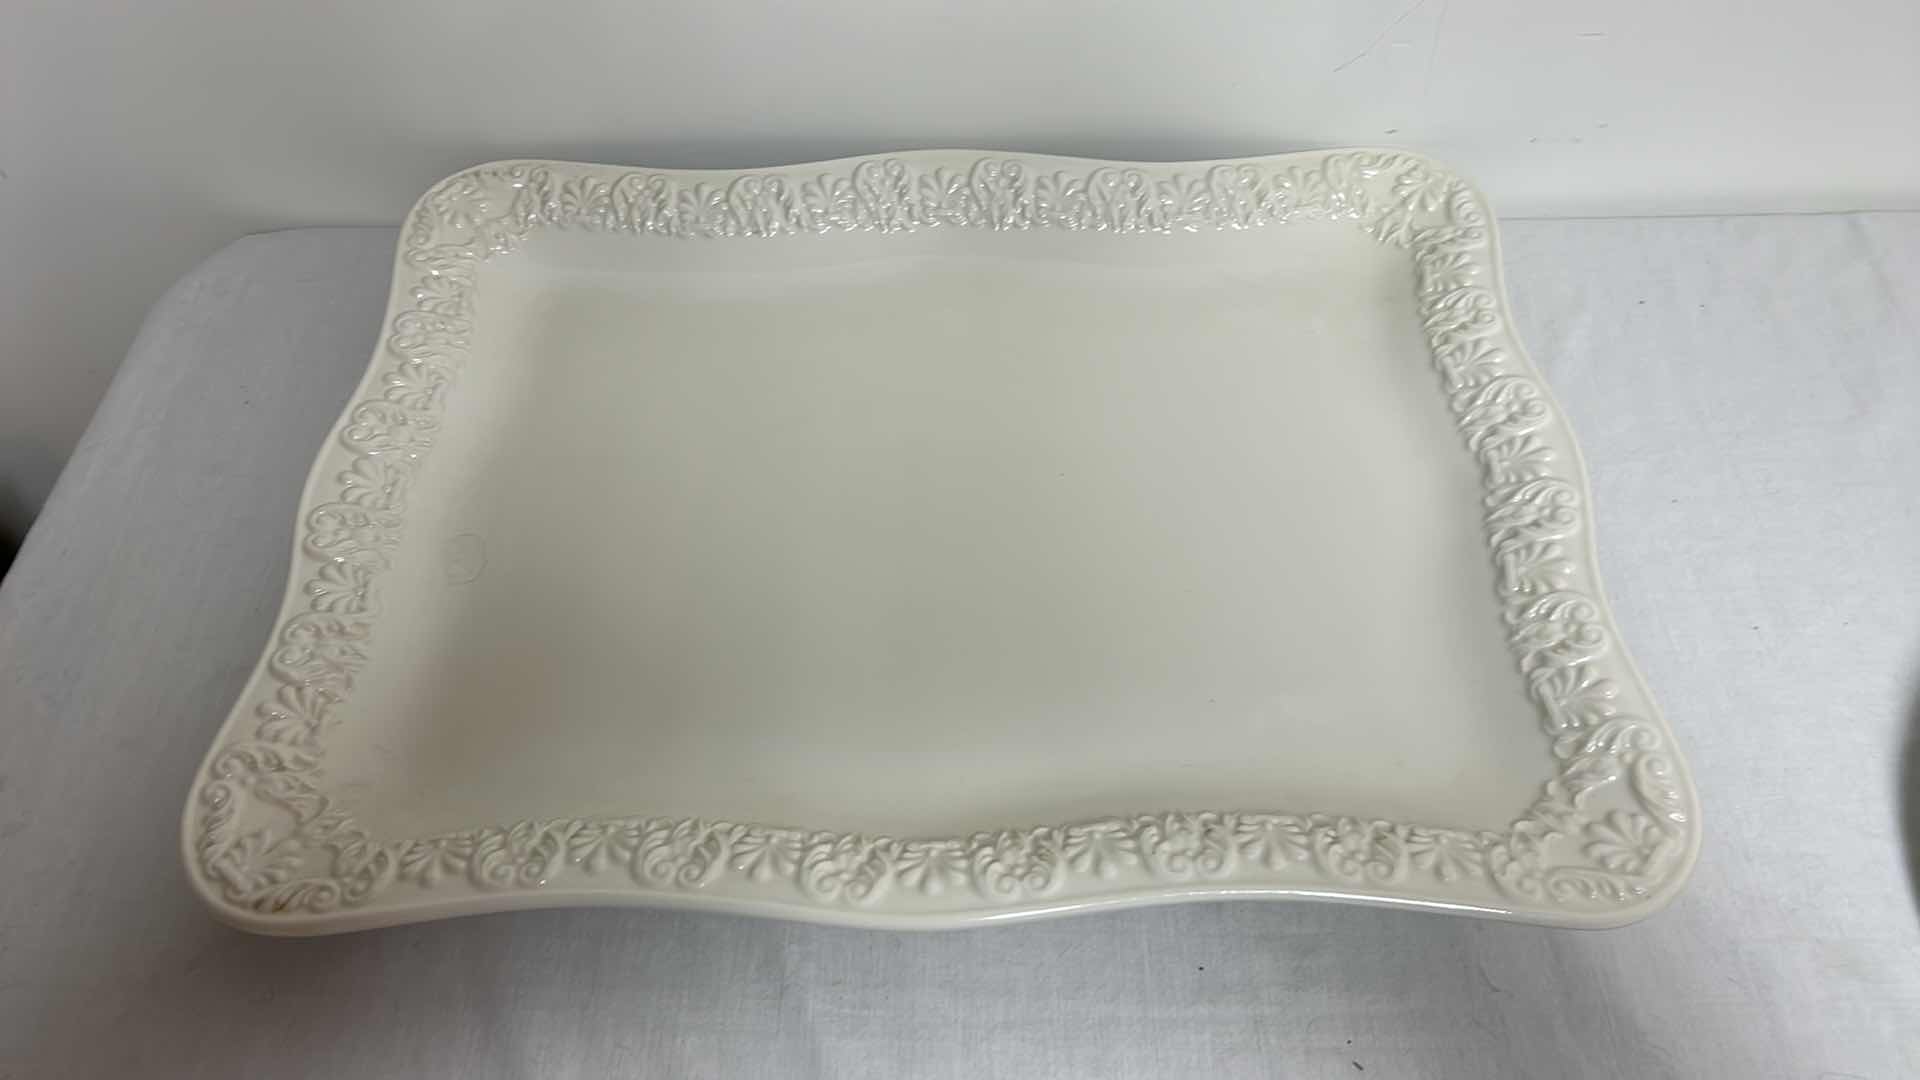 Photo 2 of PORCELAIN TRAY HANDMADE IN ITALY 22” x 17 AND GRANATE PLATE MADE IN ITALY